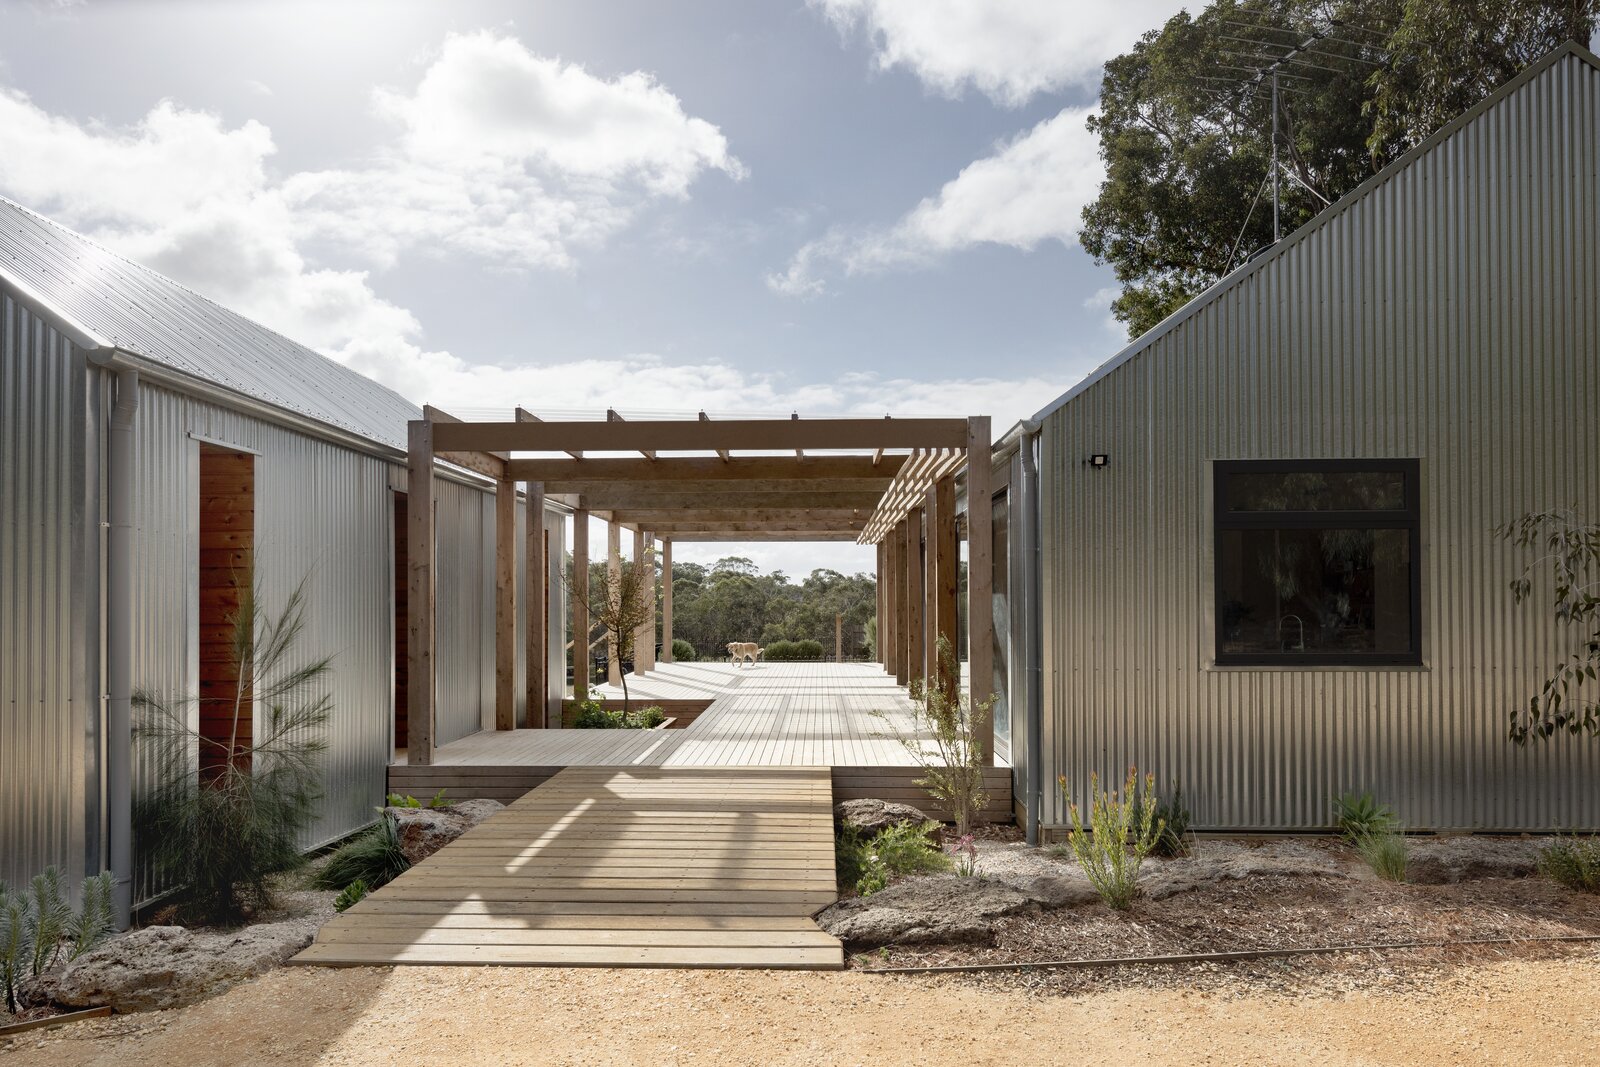 Two Sheds Cloaked in Galvanized Steel Form a Home in Rural Australia